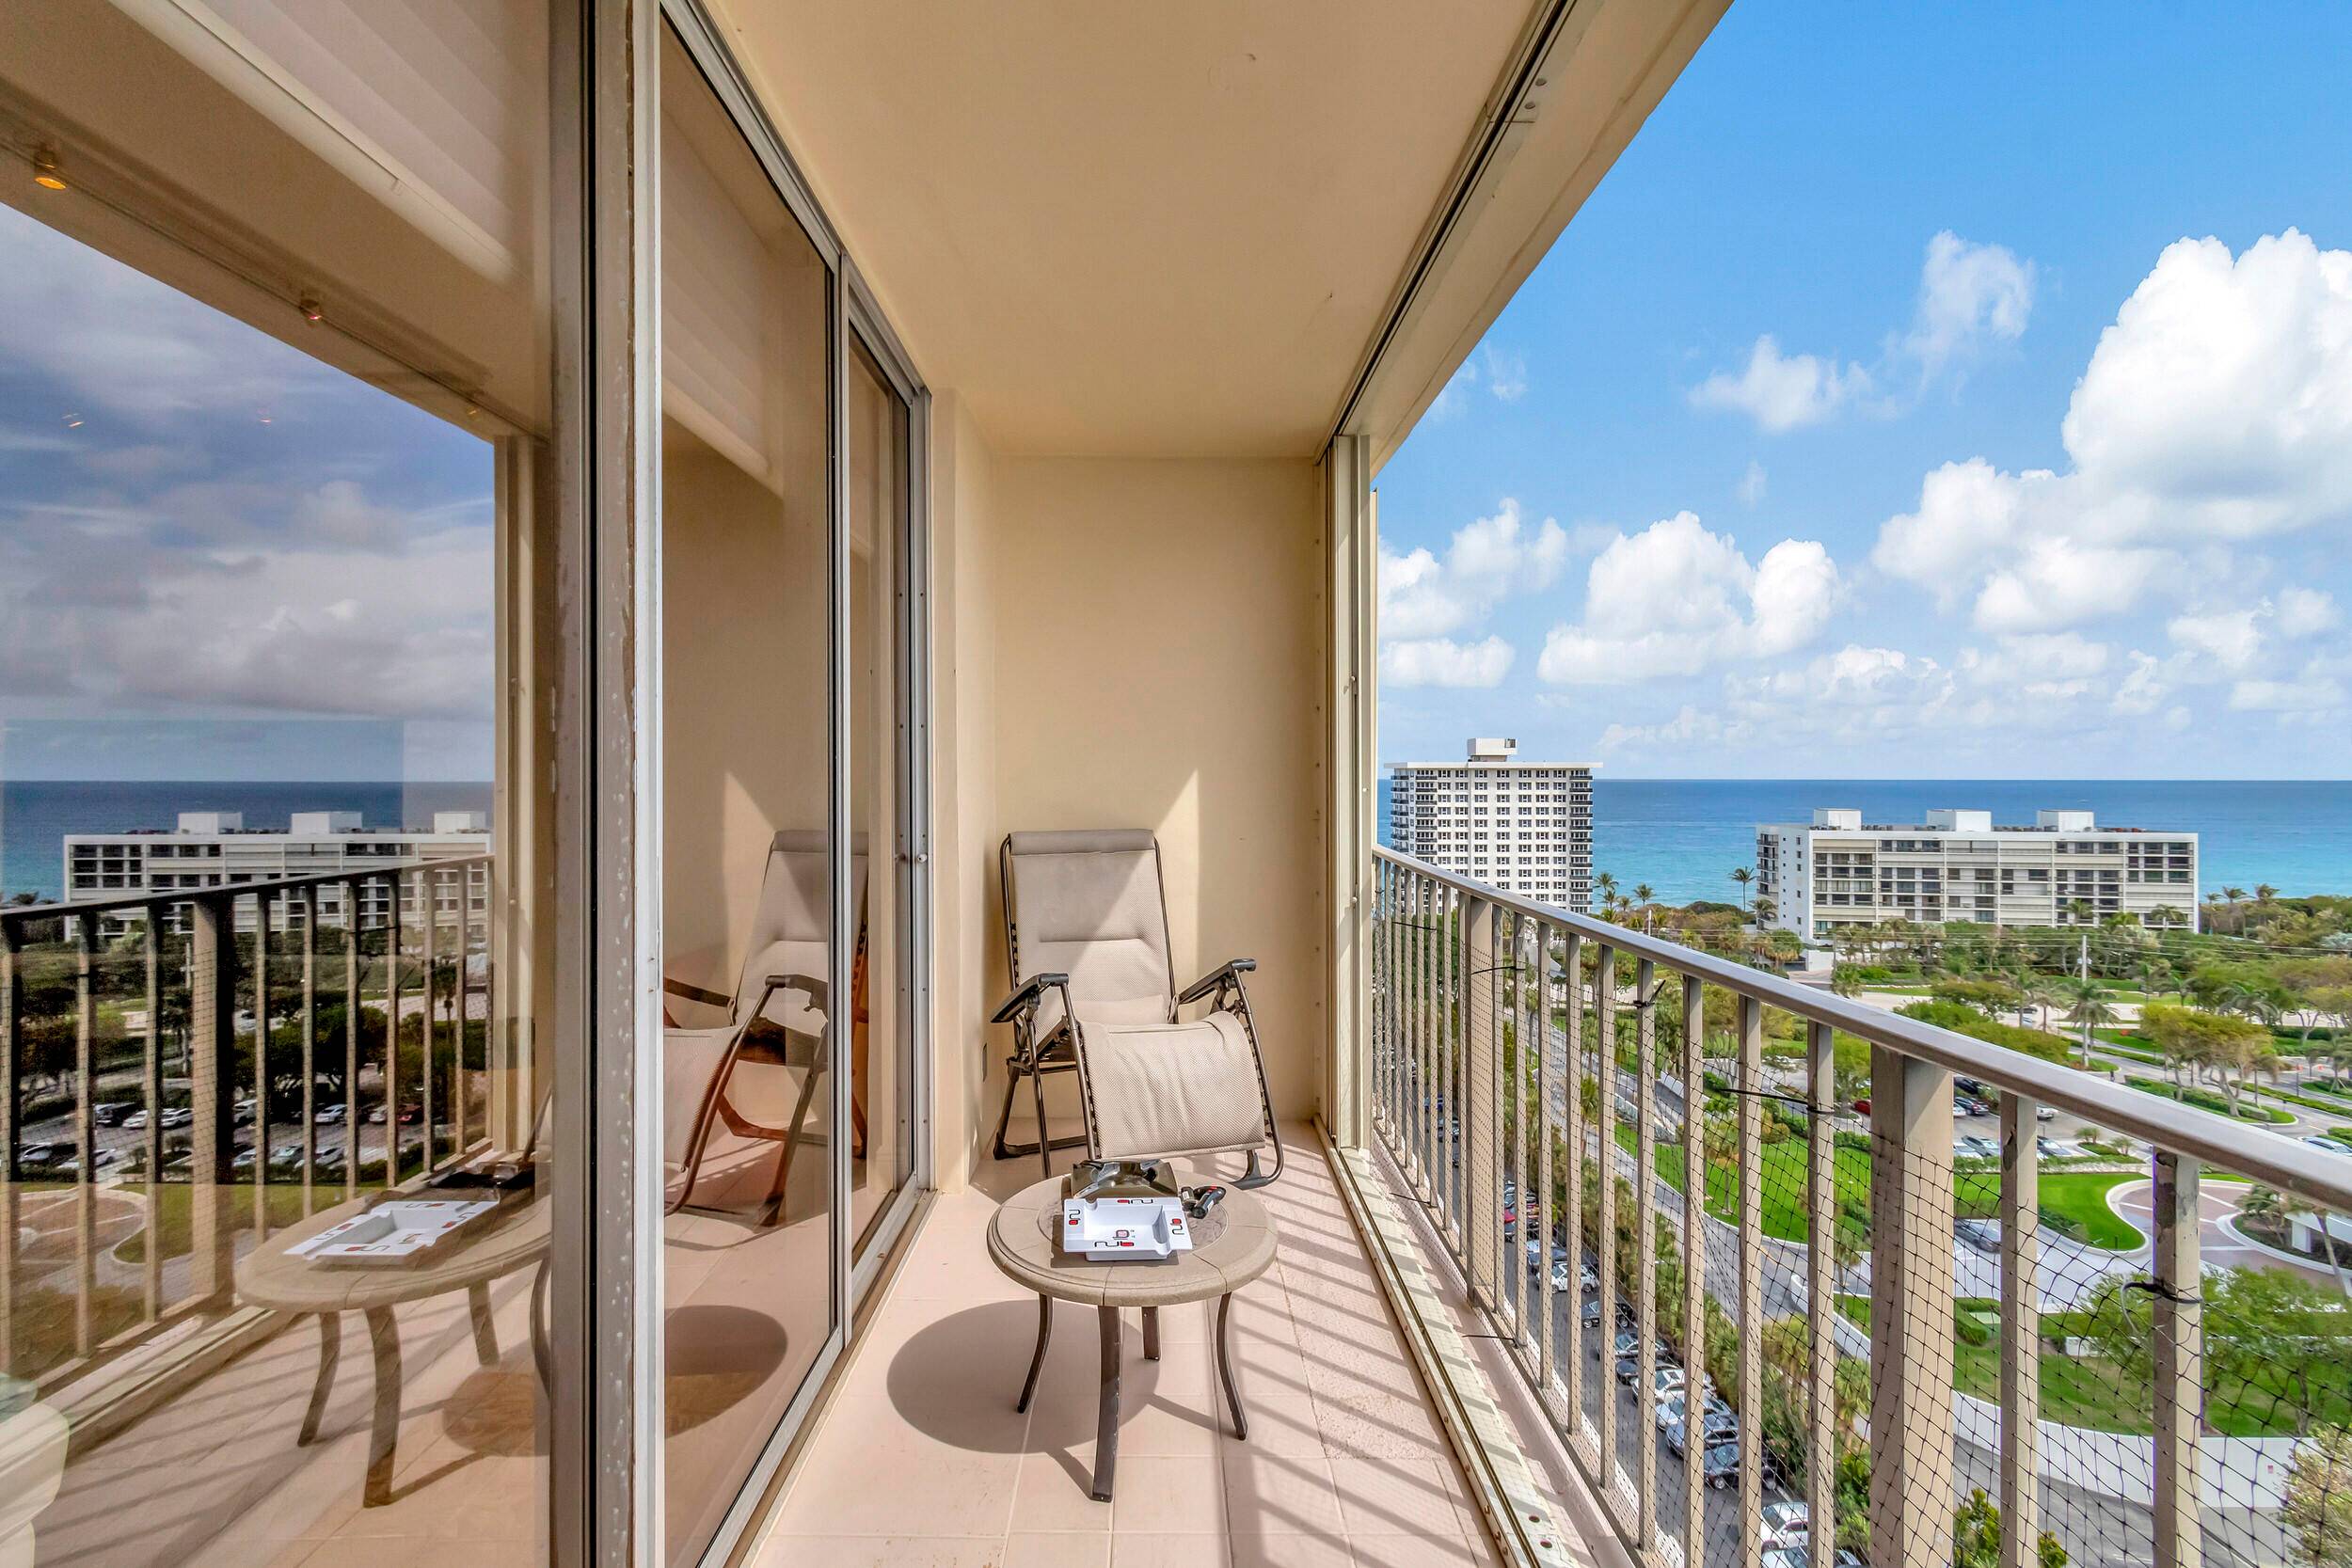 Come see this fantastic 16th floor unit with spectacular views of the ocean and direct intracoastal.